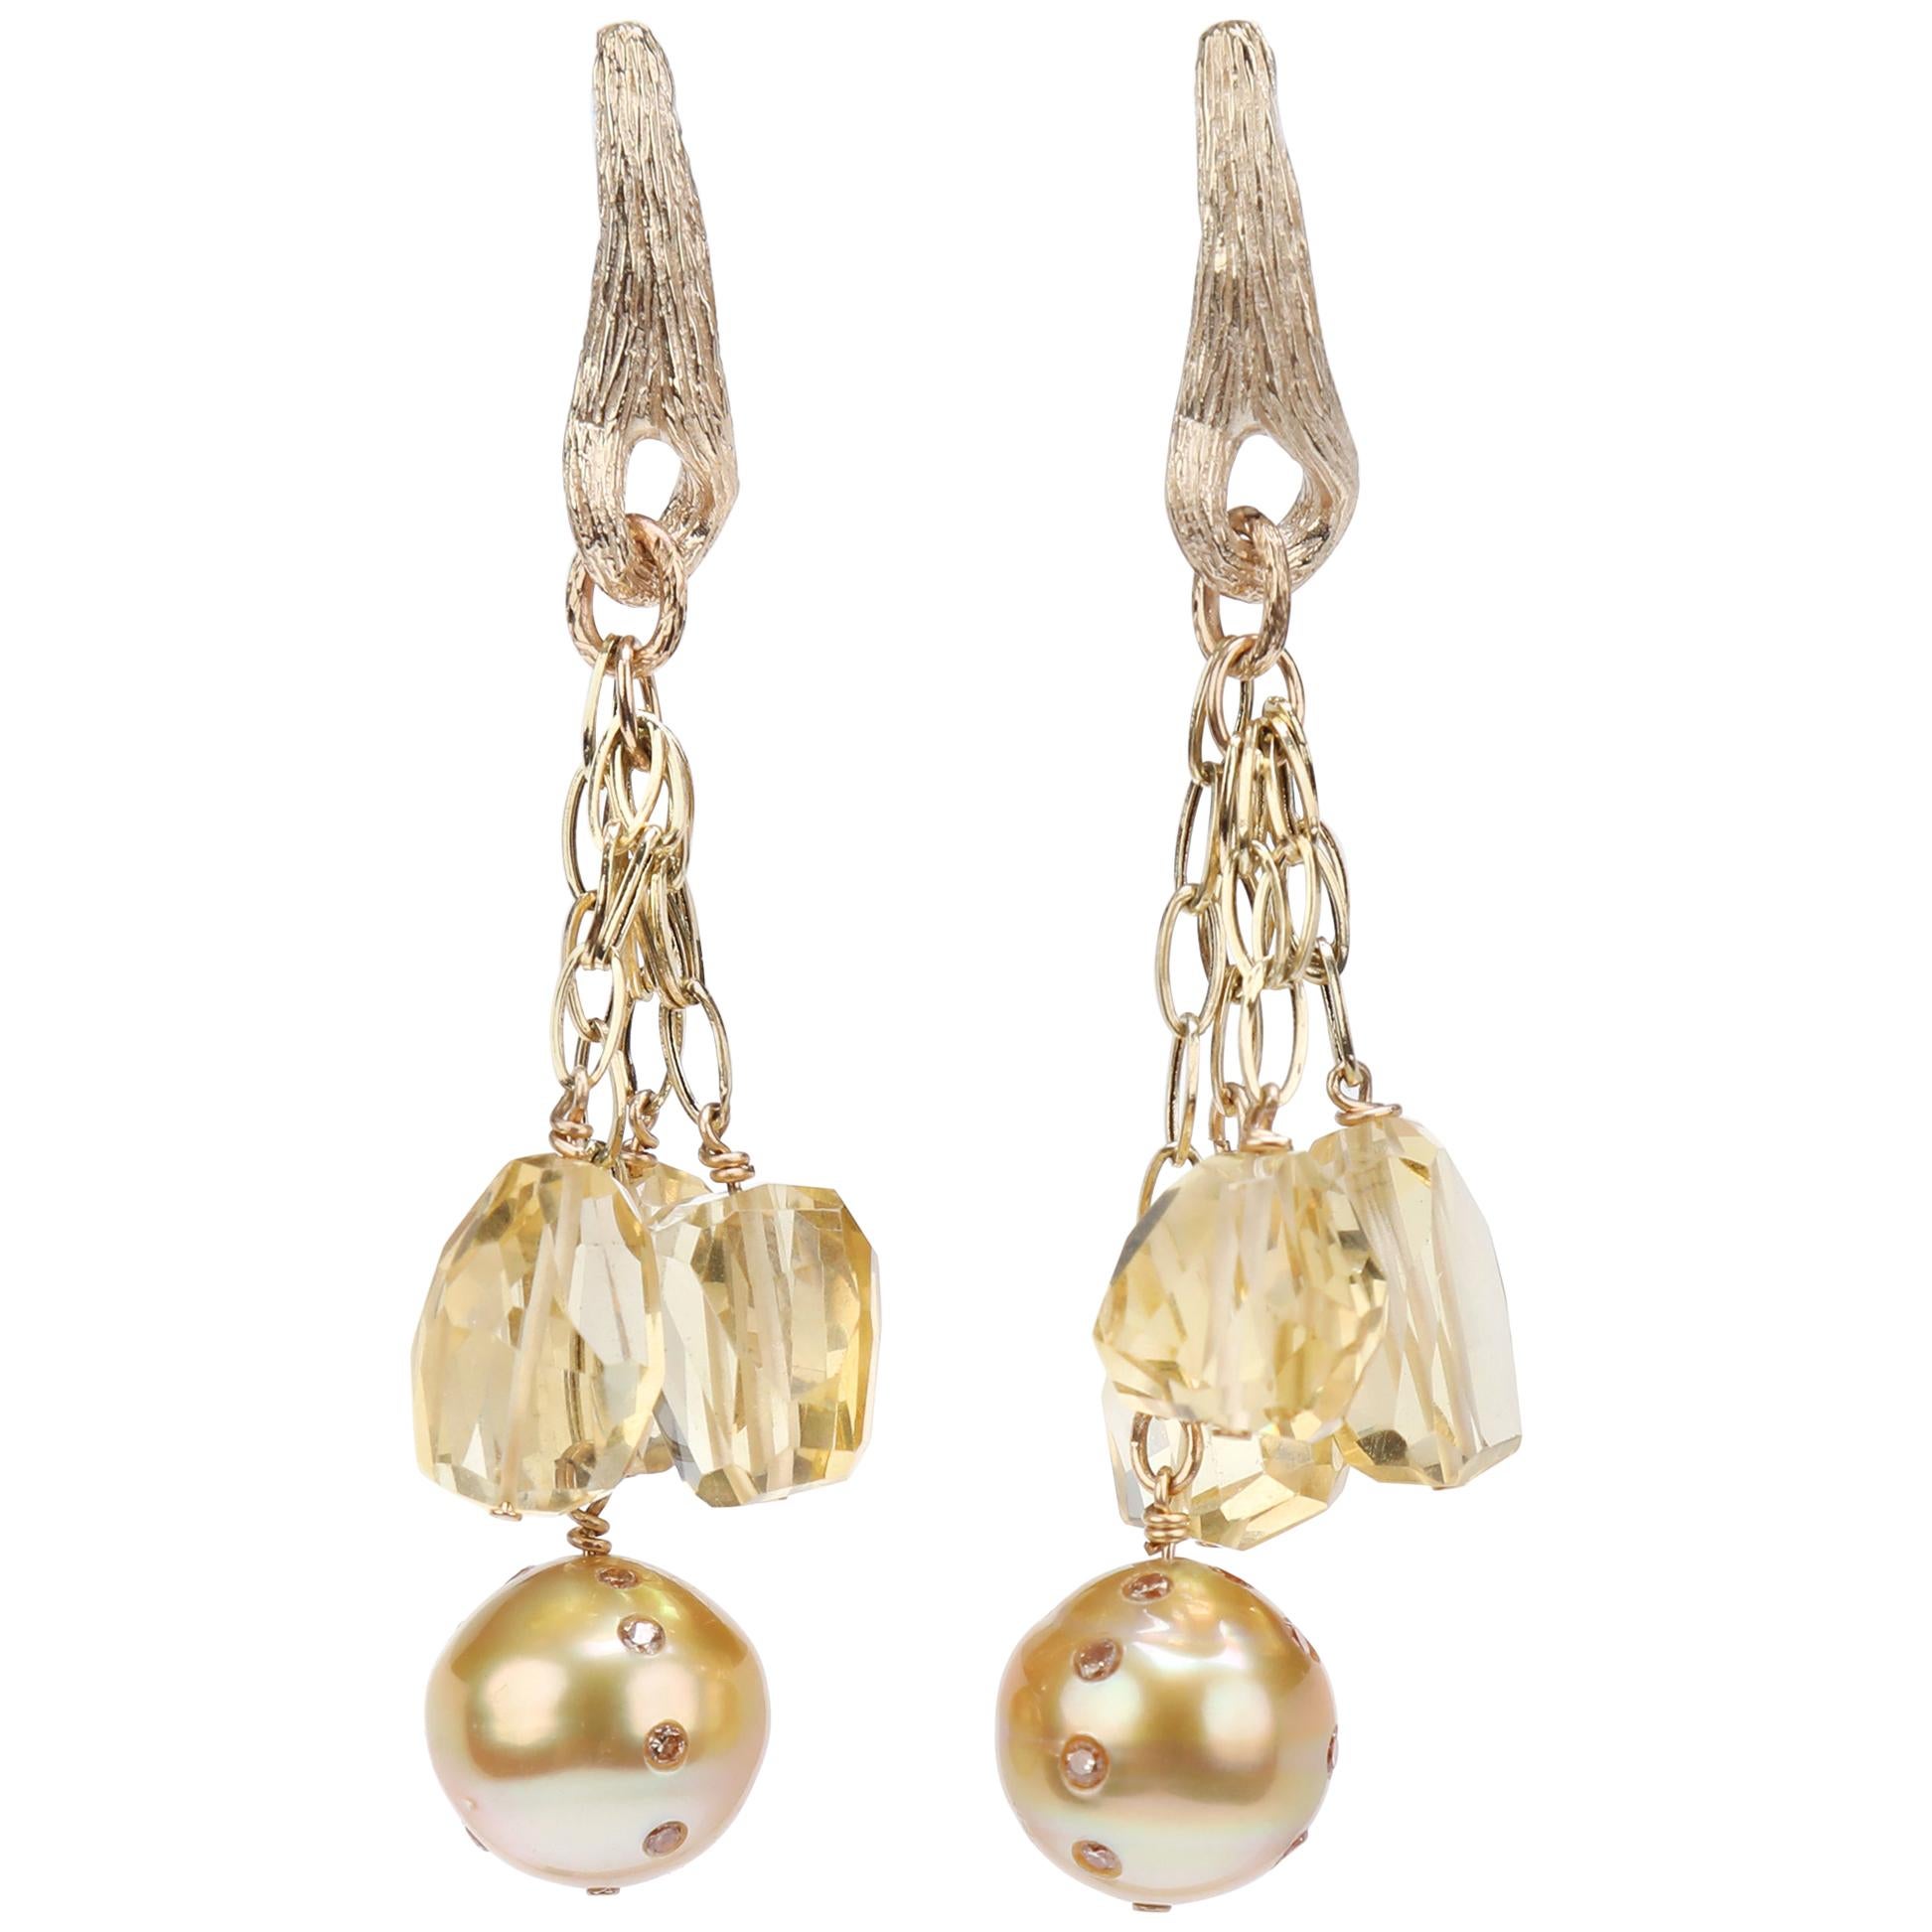 WOS Gold Drop Earrings South Sea Pearls Diamonds Citrine Gold